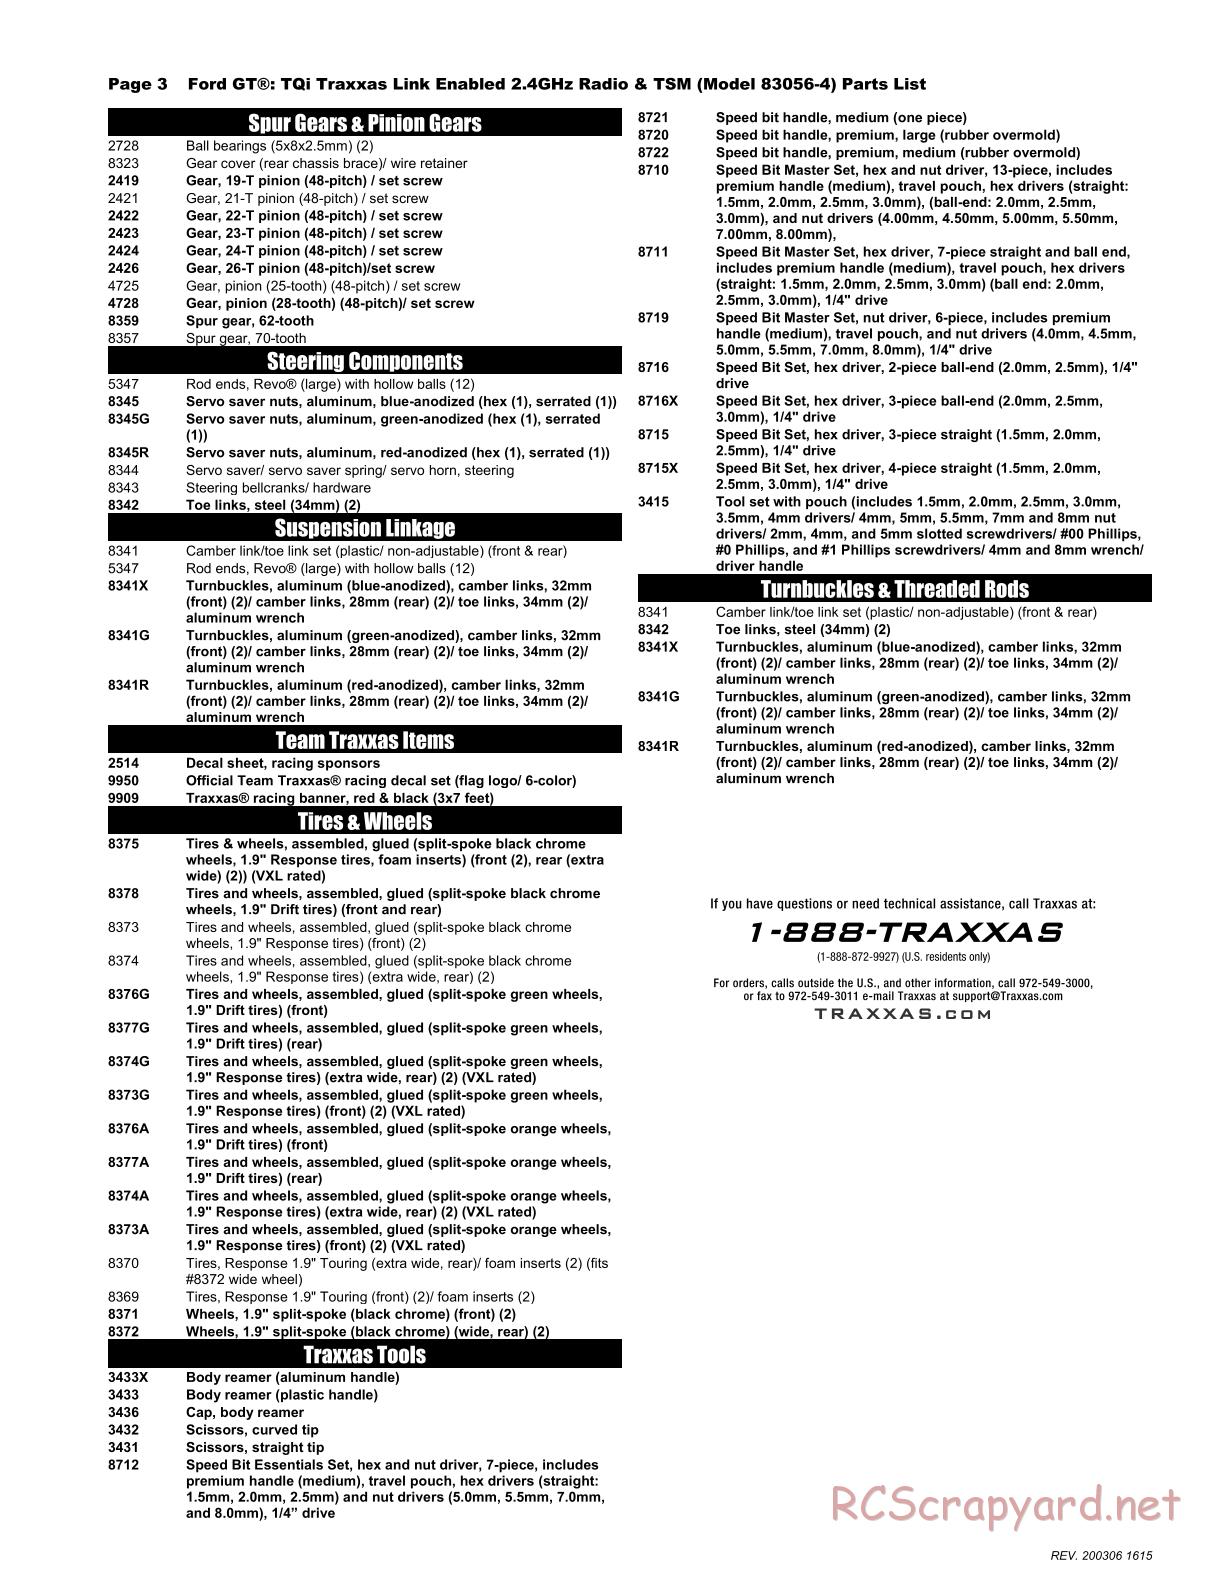 Traxxas - Ford GT - Parts List - Page 3